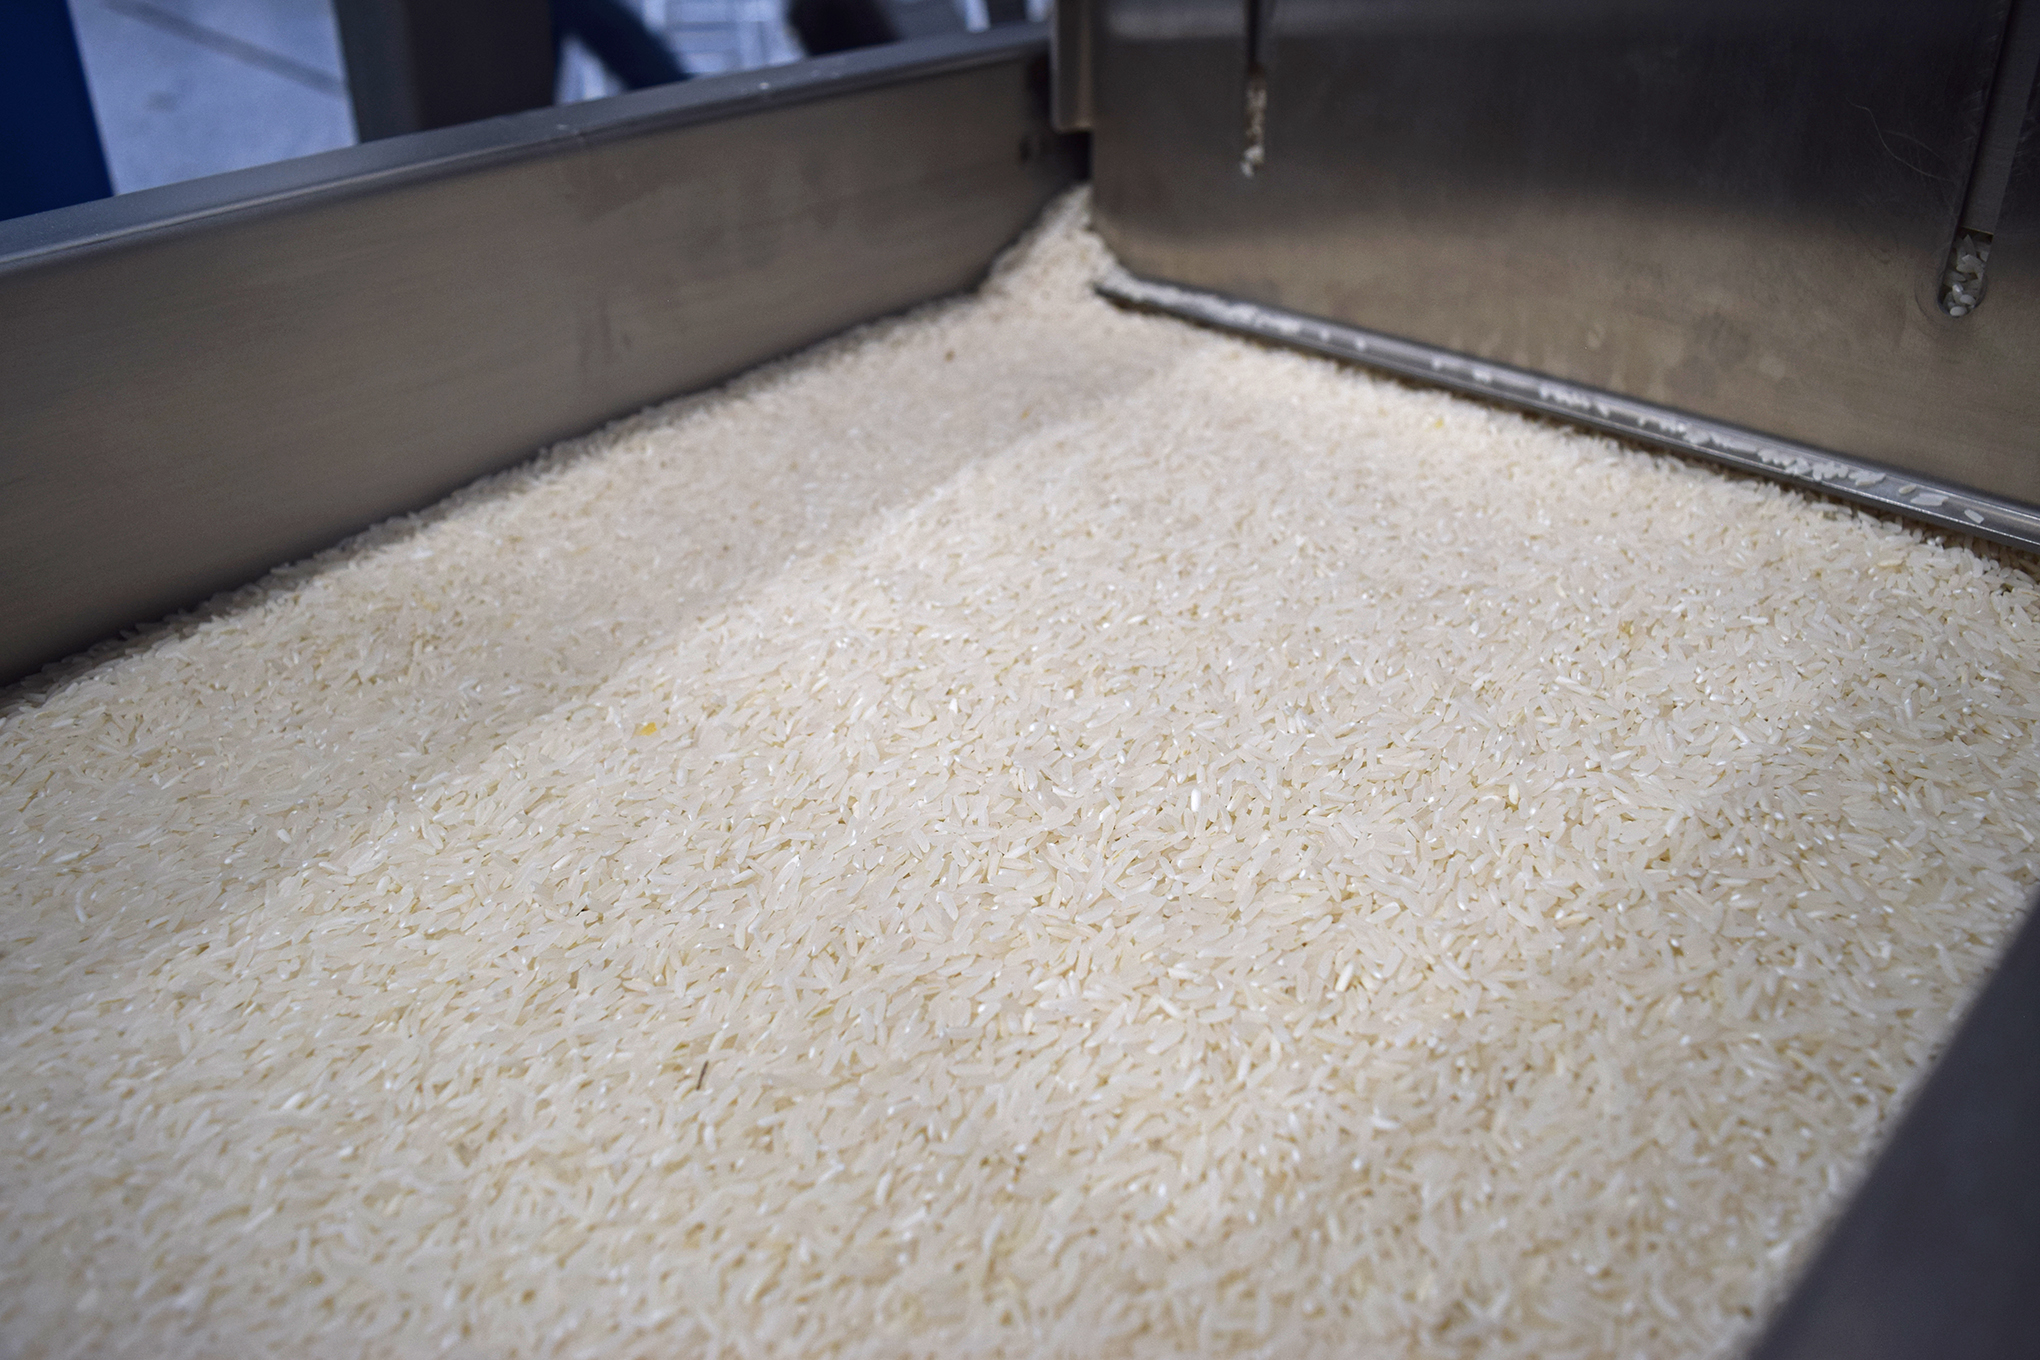 New "climate-friendly" rice moves through processing equipment.